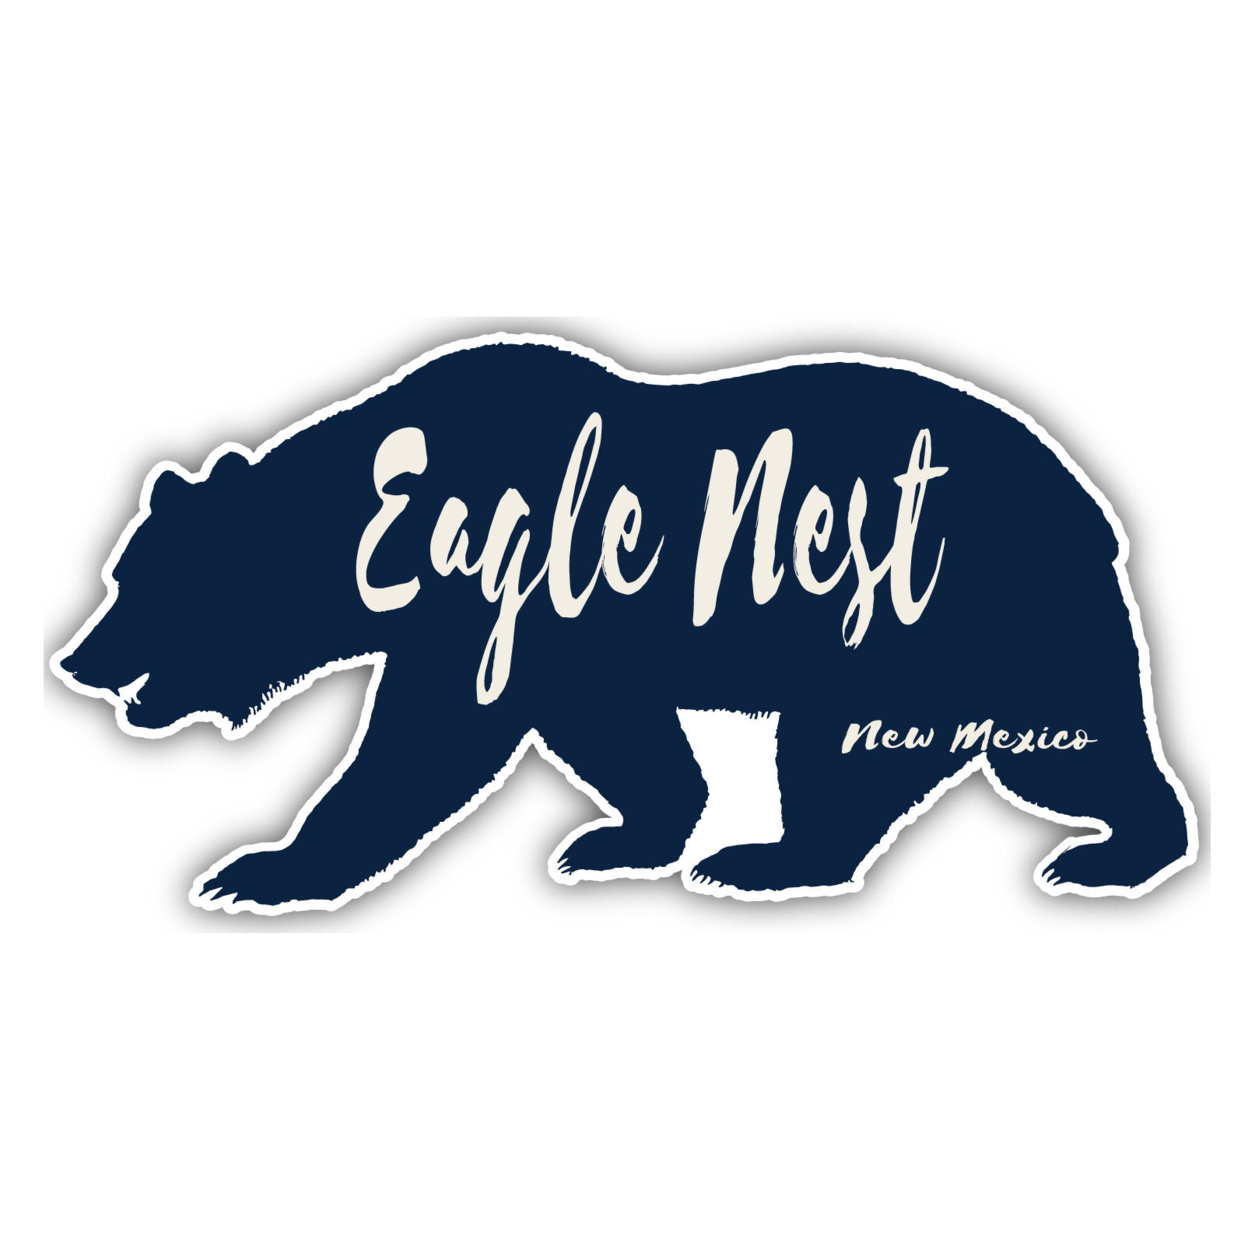 Eagle Nest New Mexico Souvenir Decorative Stickers (Choose Theme And Size) - Single Unit, 2-Inch, Great Outdoors